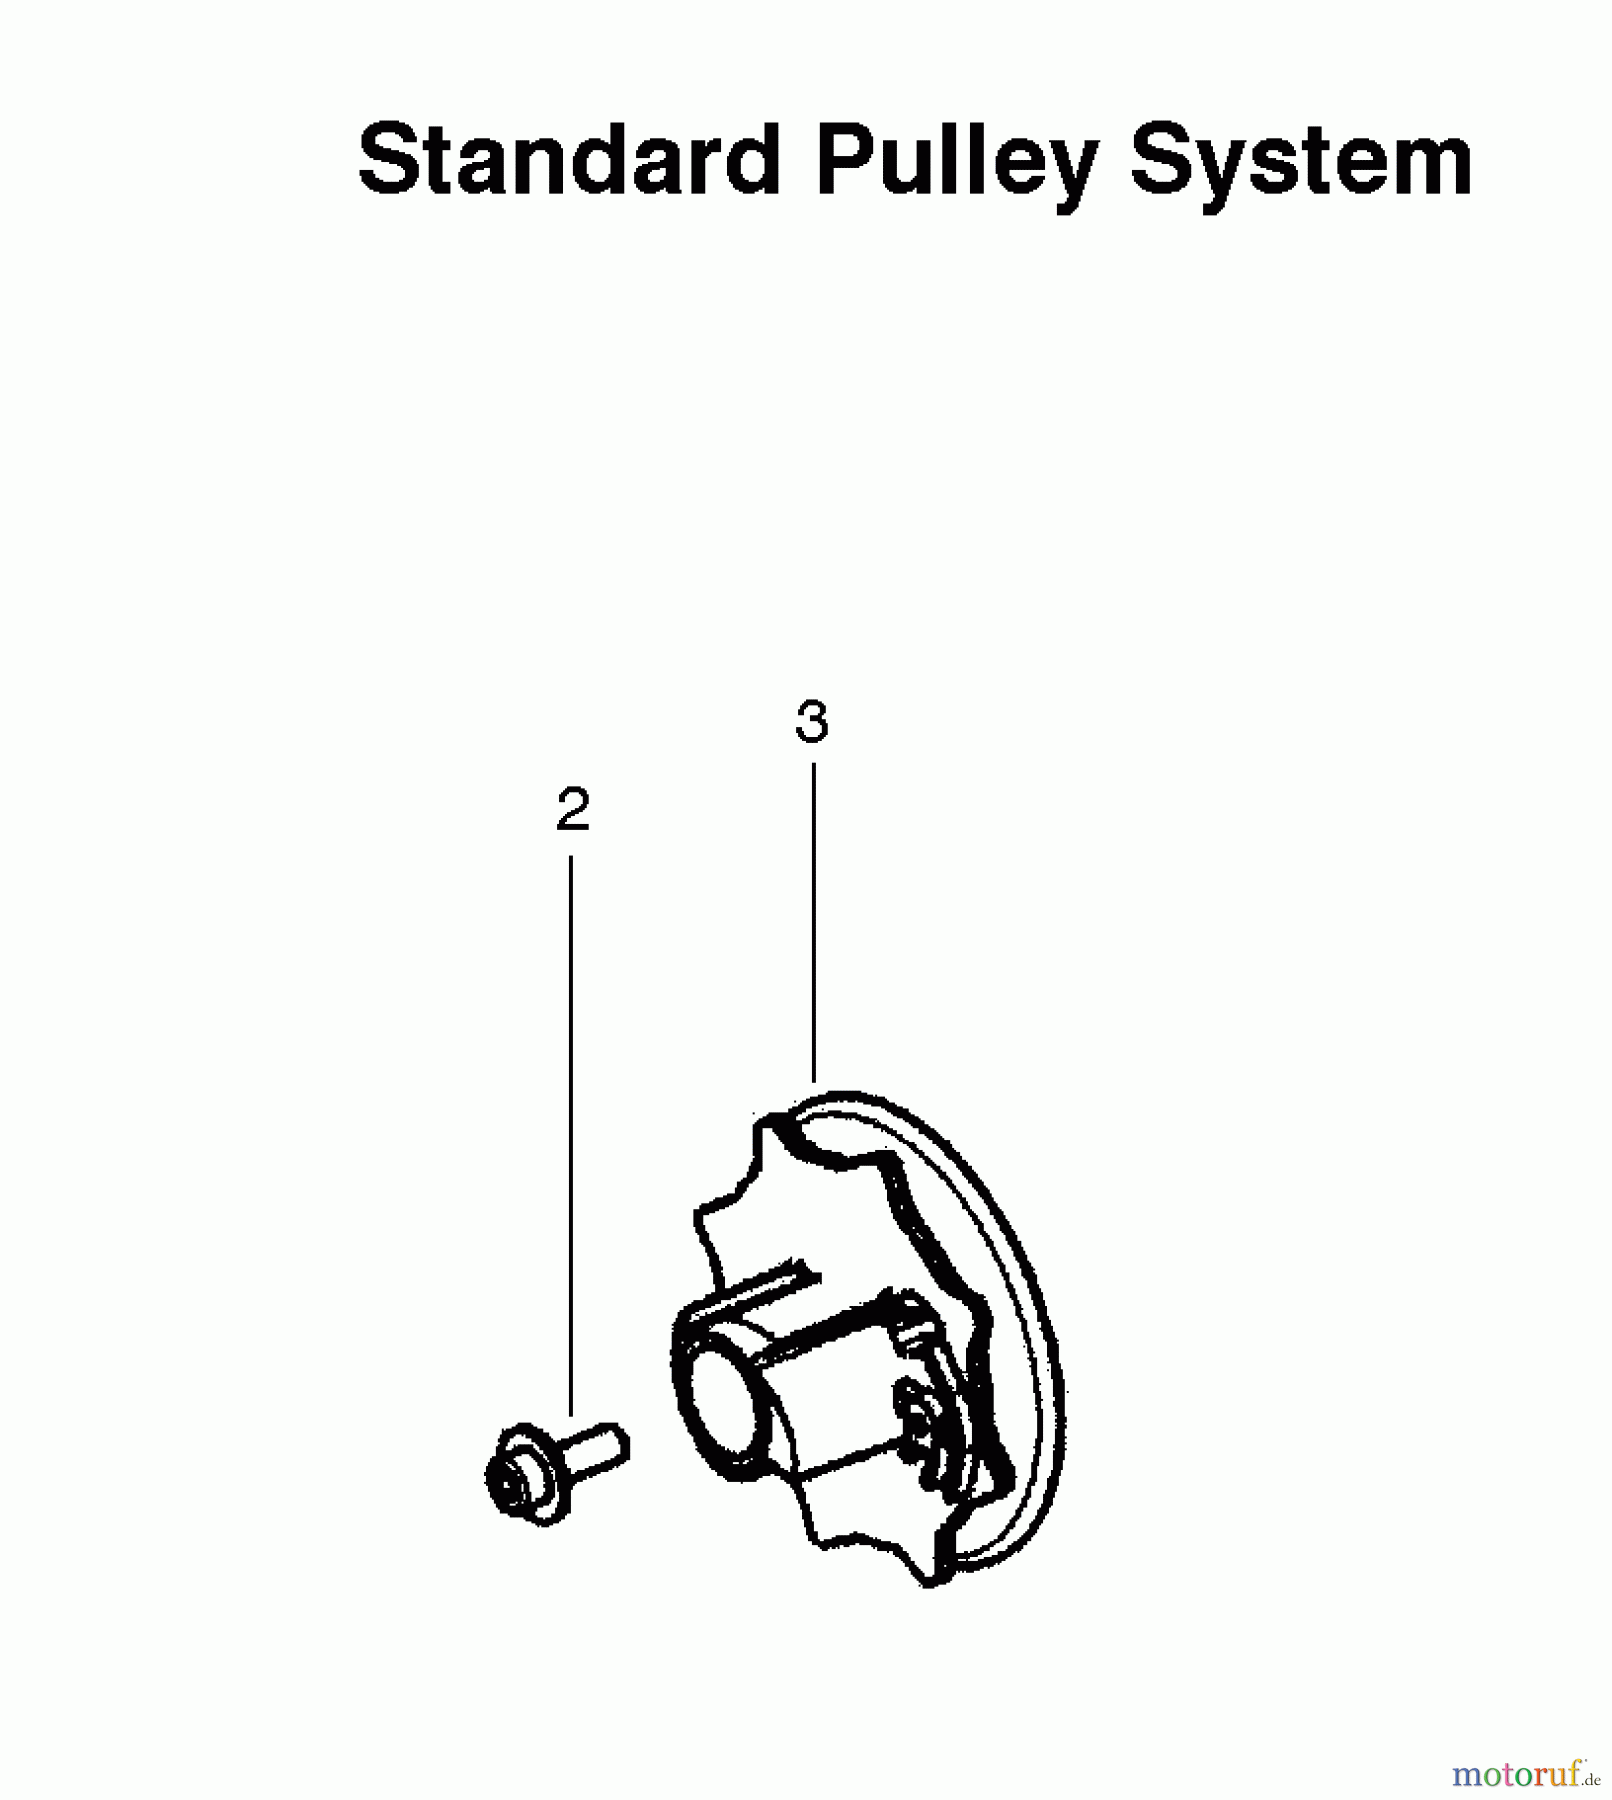  Poulan / Weed Eater Motorsägen P3314 (Type 1) - Poulan Chainsaw Standard Pulley System